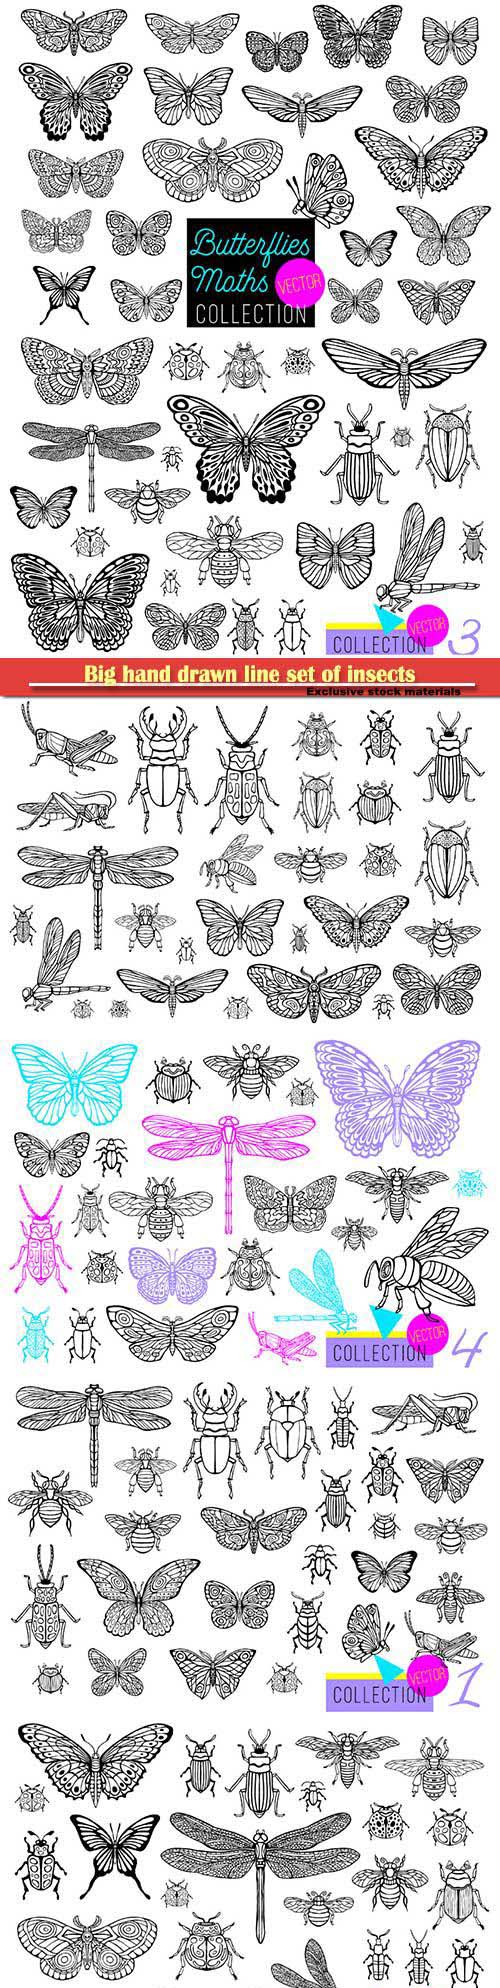 Big hand drawn line set of insects, beetles, honey bees, butterfly moth, bumblebee, wasp, dragonfly,...